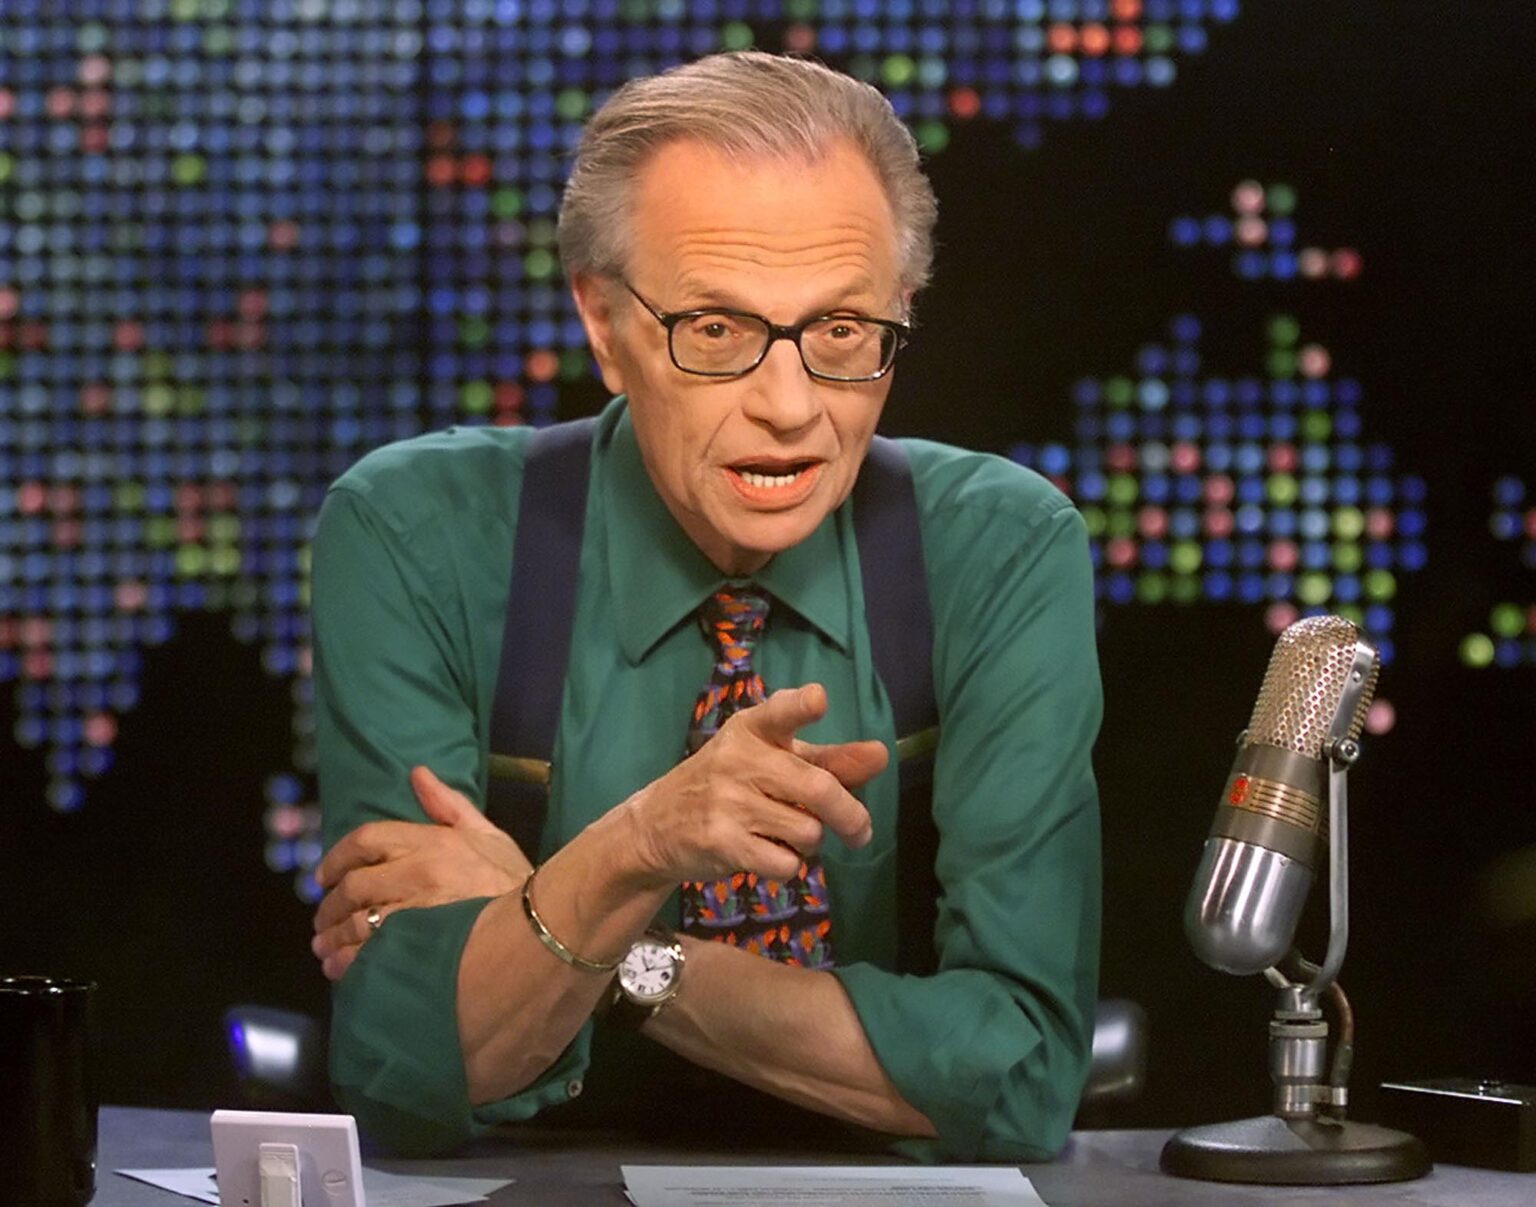 No matter how many times you've been married, odds are Larry King had more spouses than you. Learn about the famous broadcaster's expansive marital history!